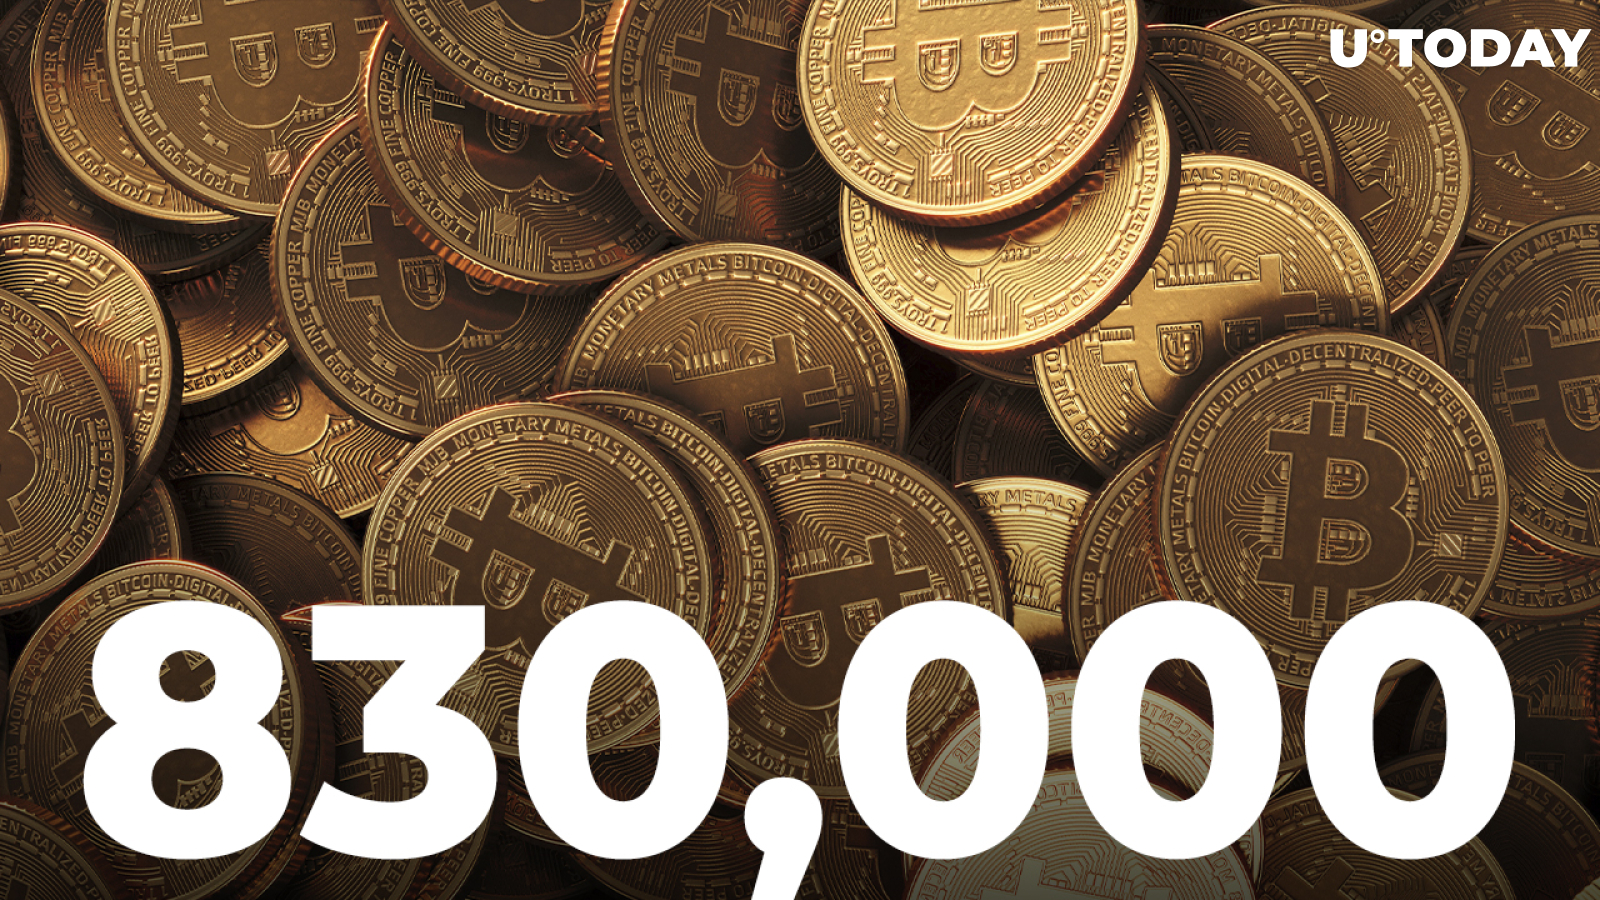 Bitcoin Addresses with 1 BTC Surpass 830,000 as Number of Retail Investors Grows